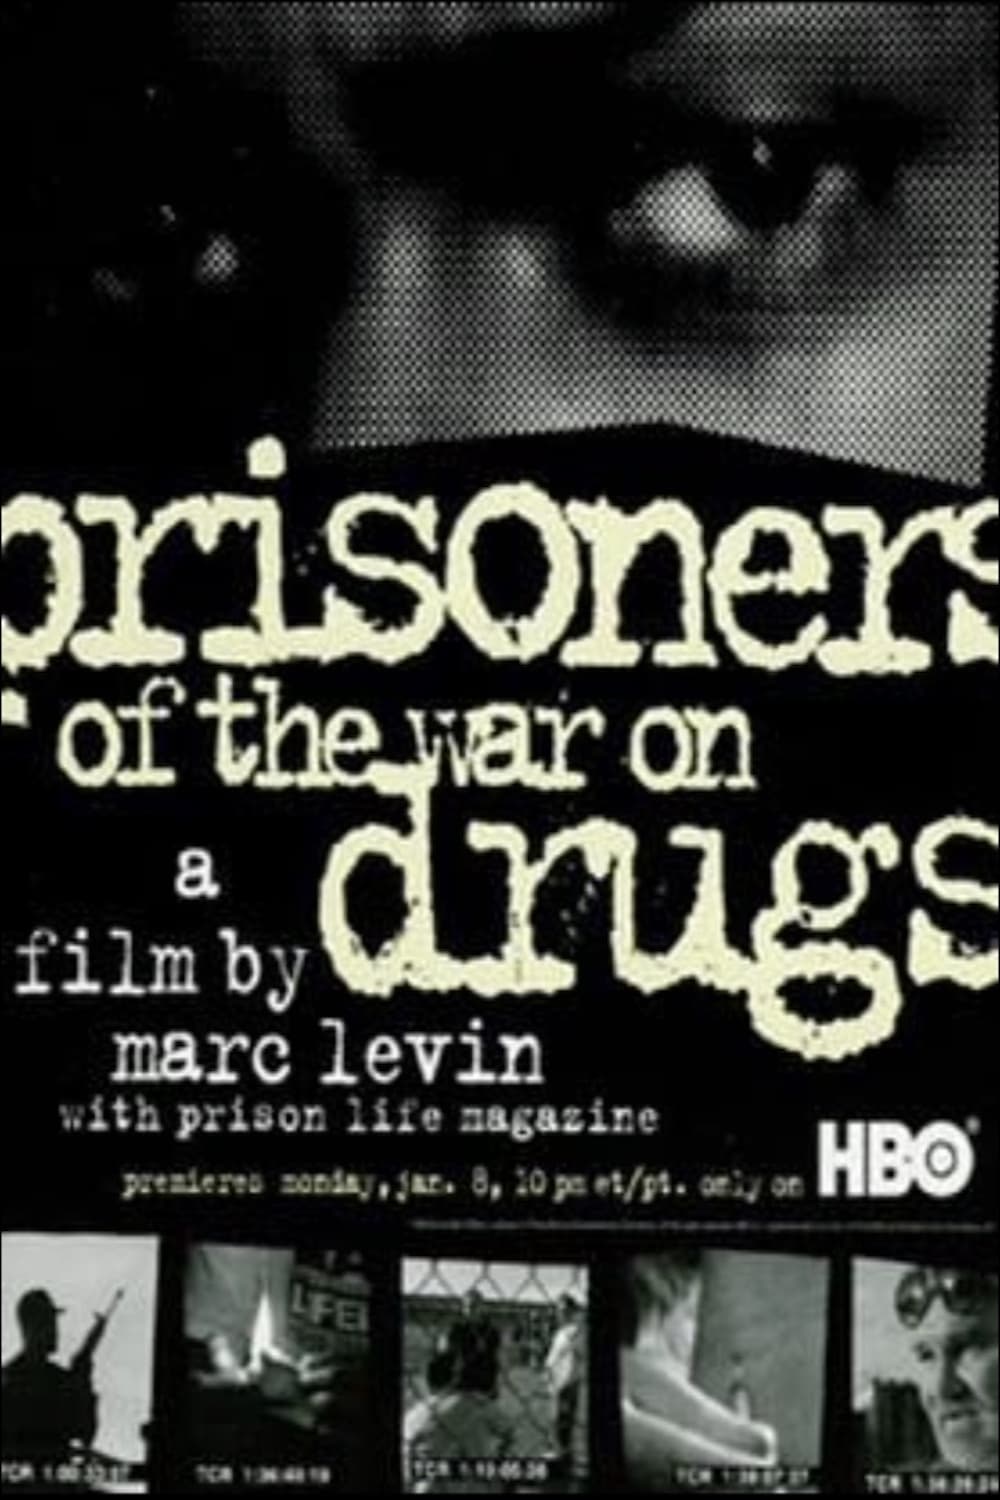 Prisoners of the War on Drugs